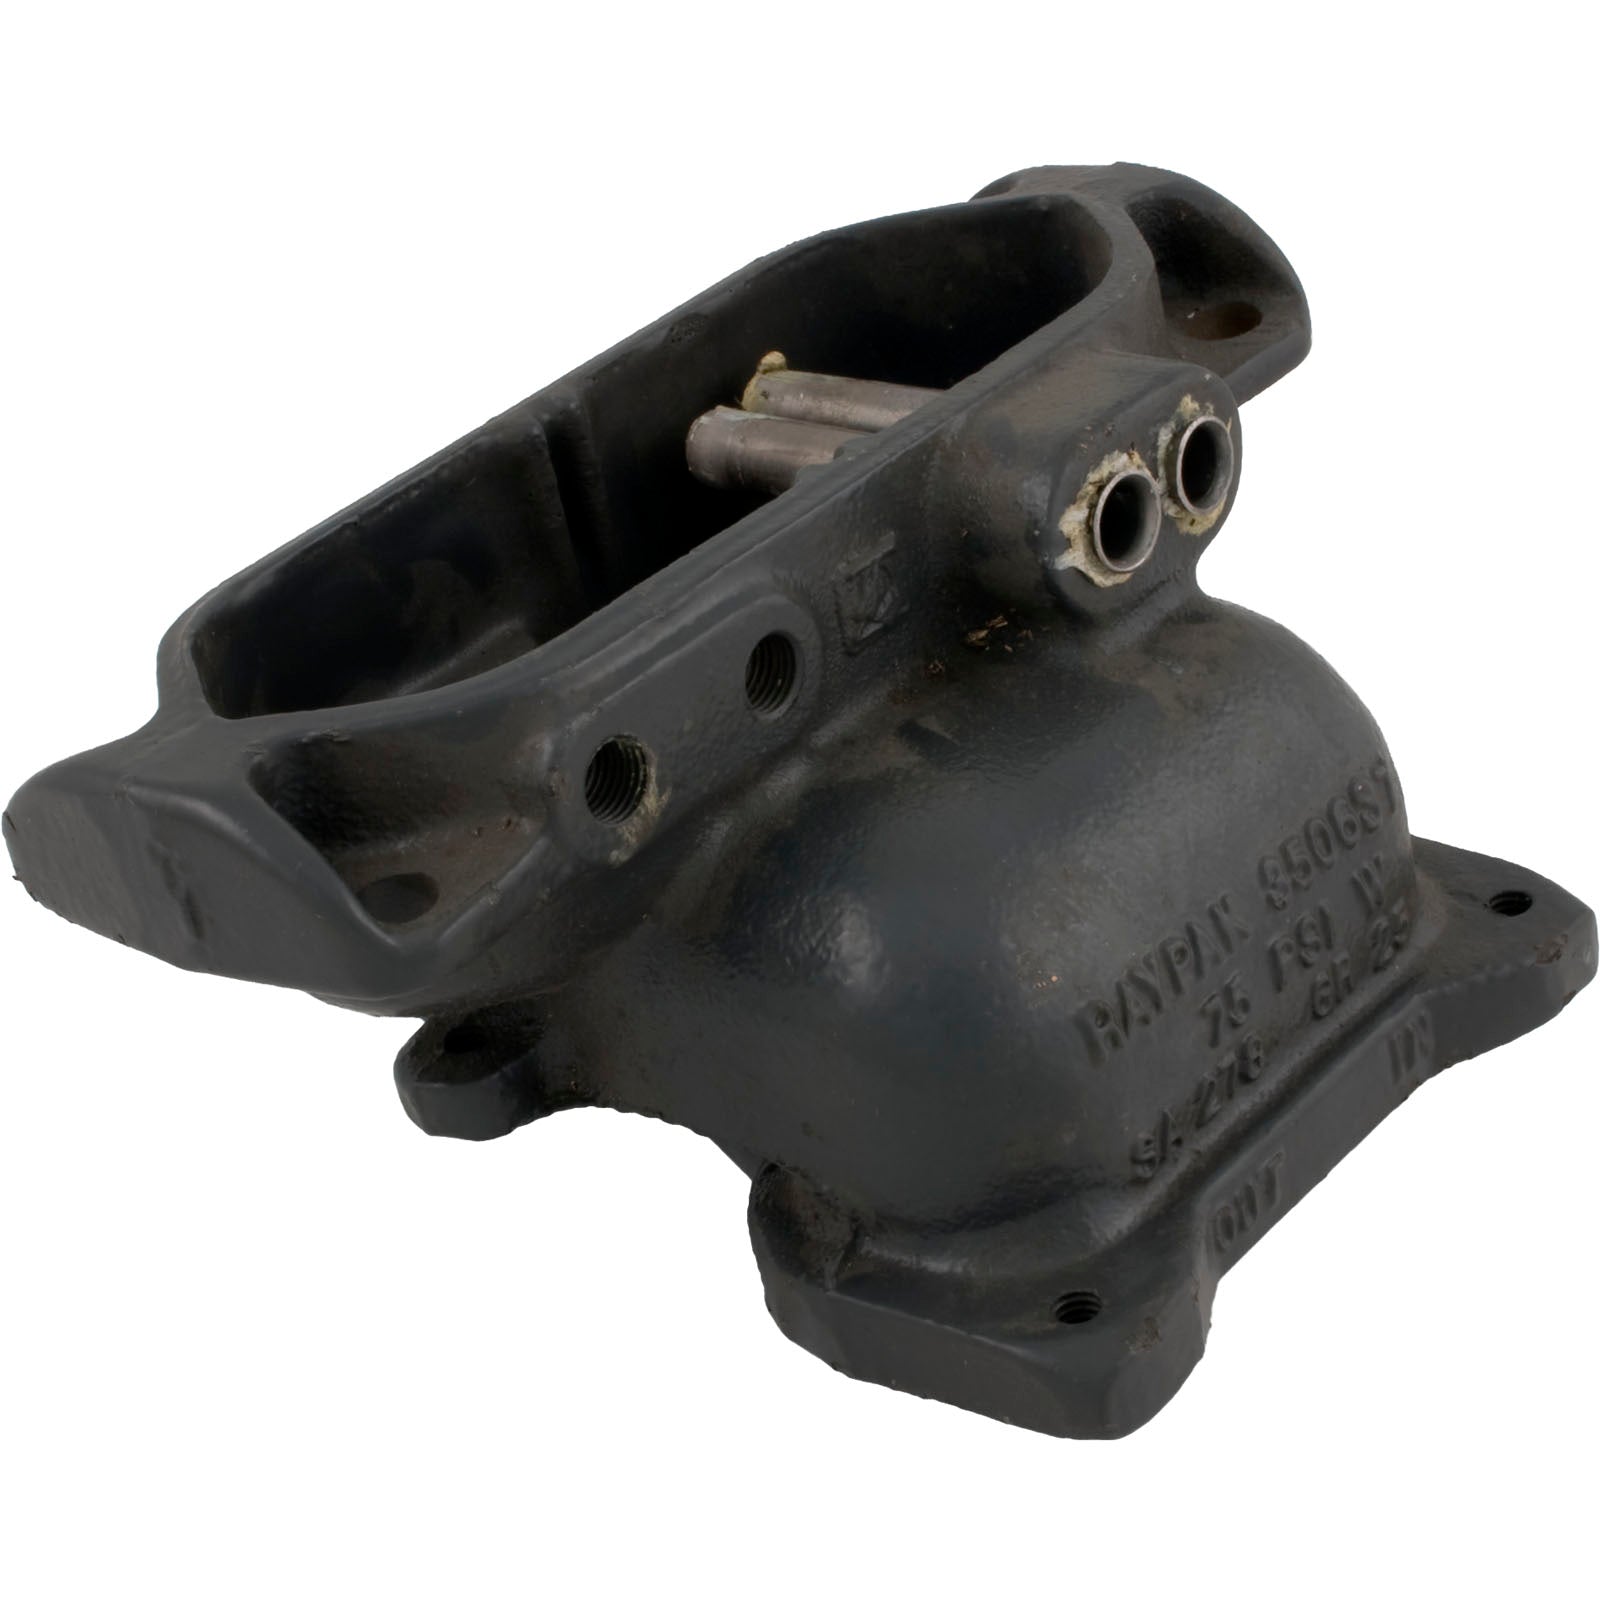 Inlet/Outlet Header, Cast Iron, Raypak 002435F